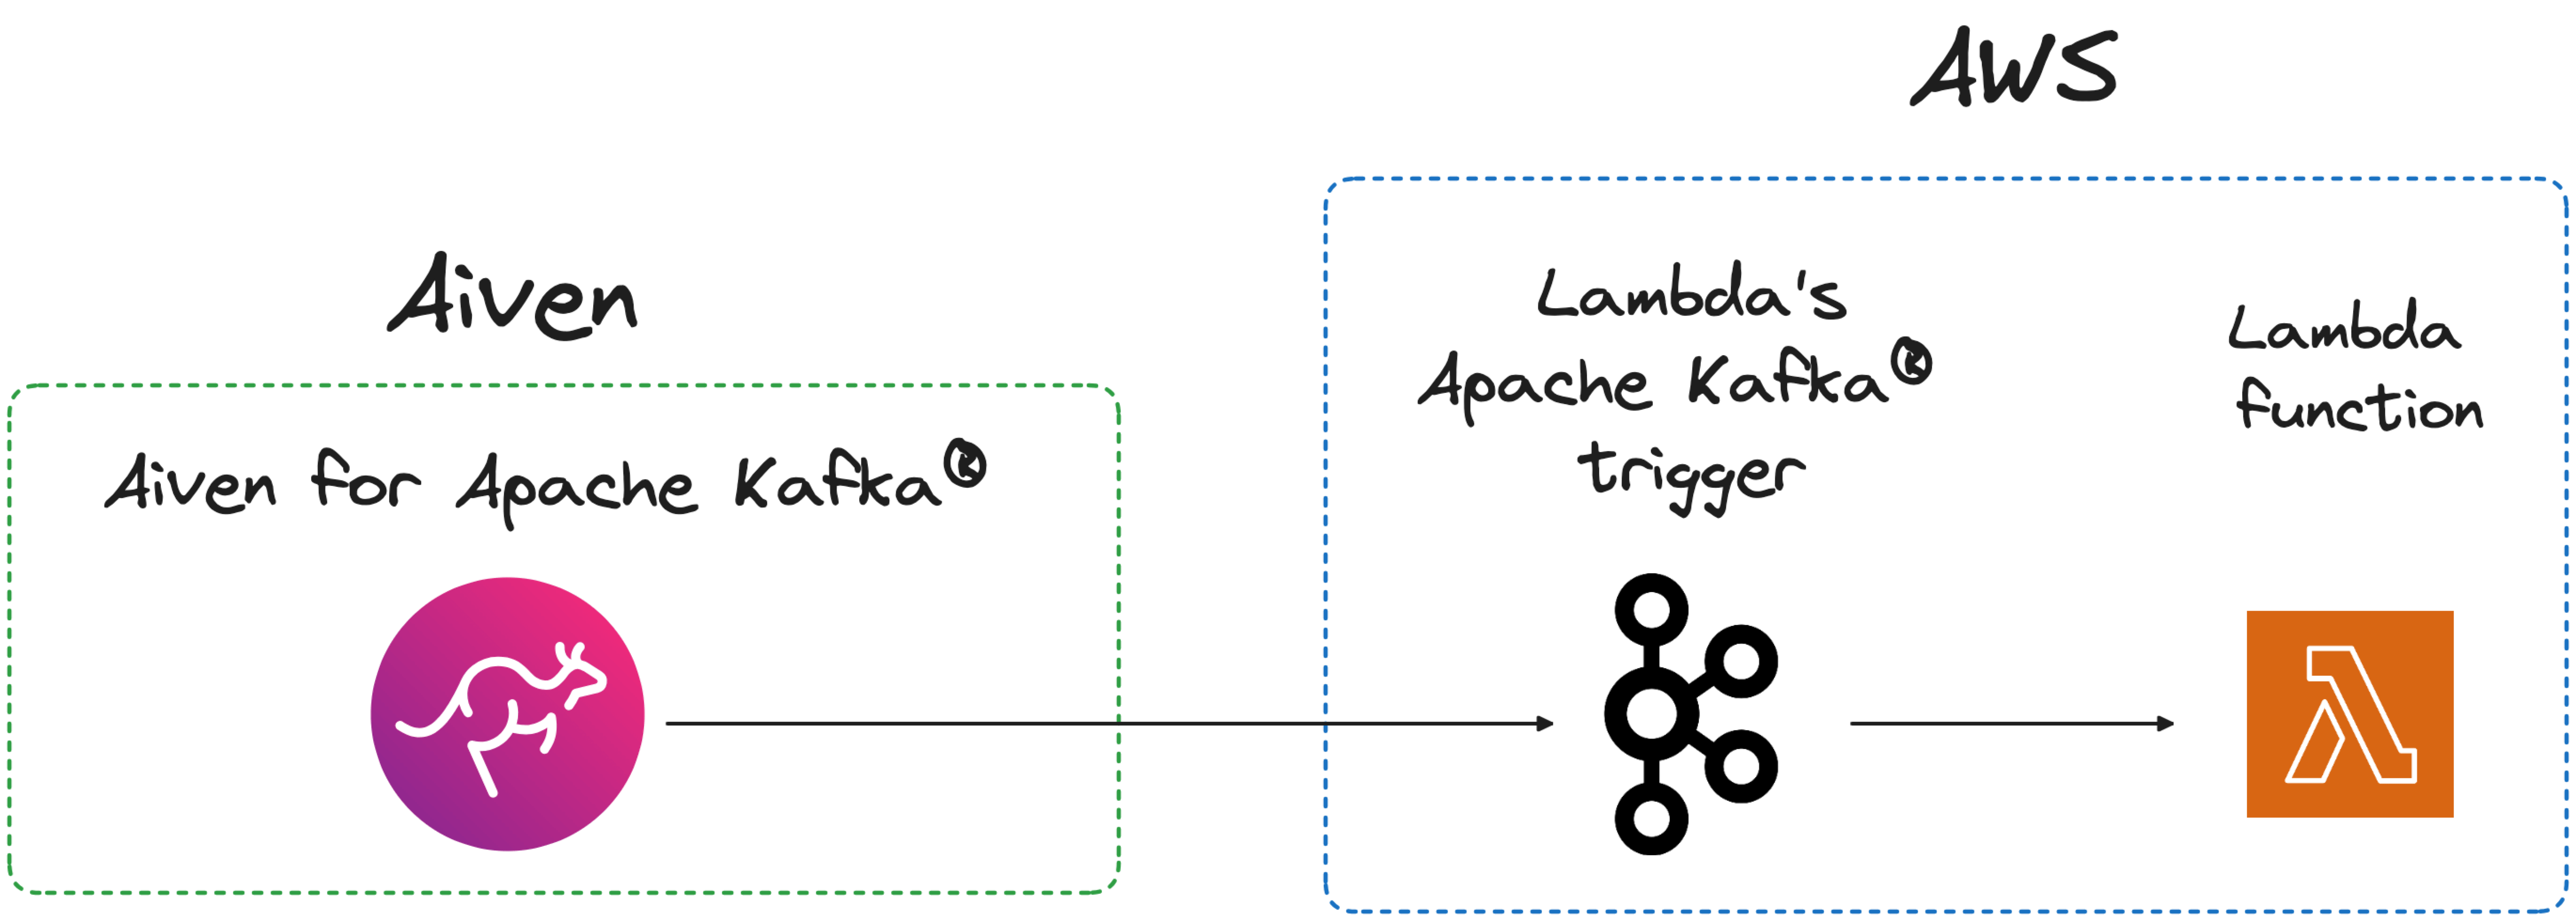 Architecture including Aiven for Apache Kafka, Lambda's Apache Kafka trigger and the function